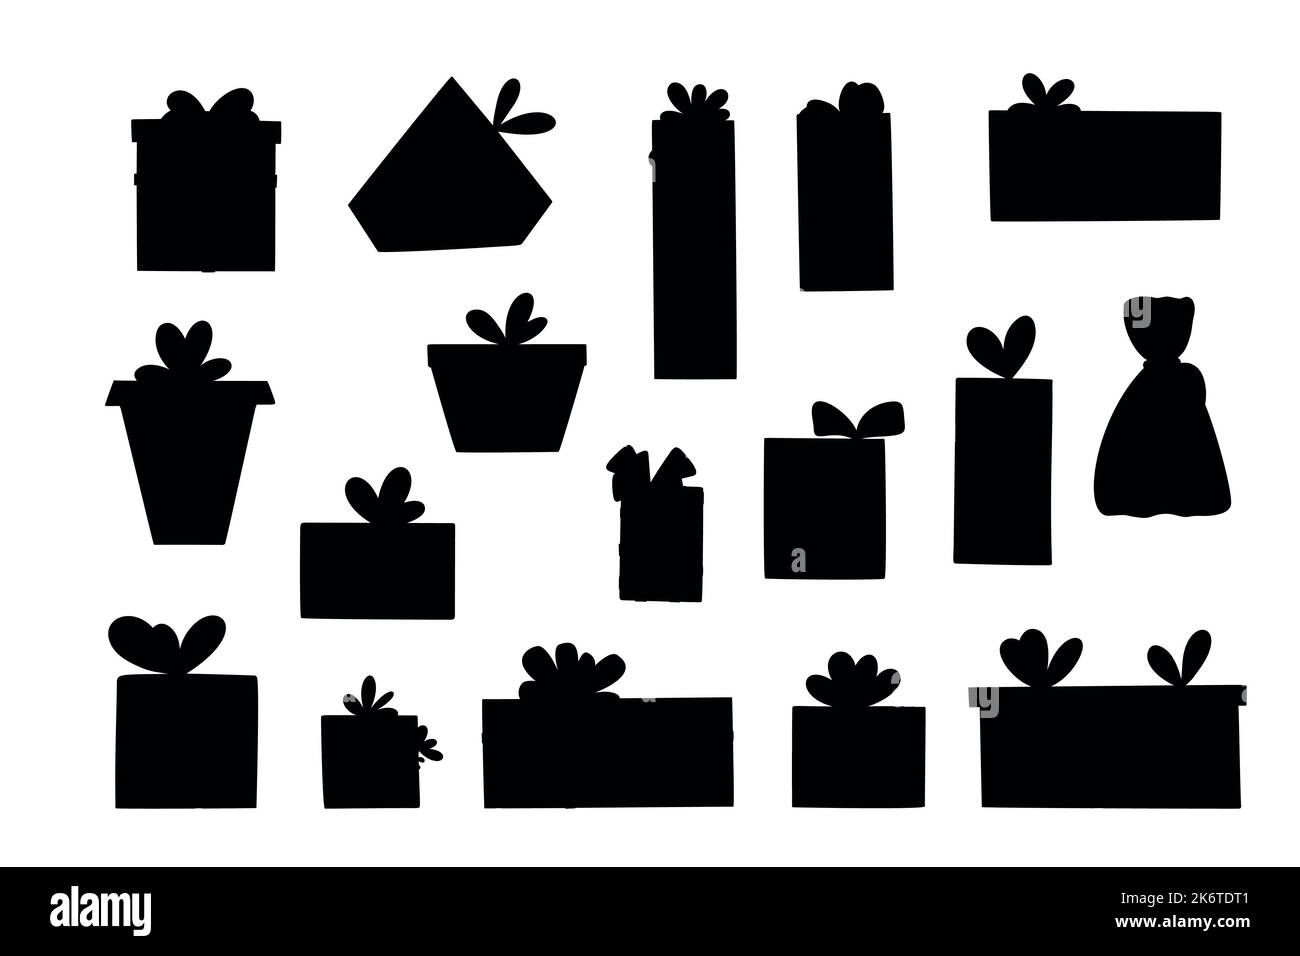 Gift boxes set, hand drawn doodle celebration decor for seasonal holiday celebration, birthday, festive mood decoration and family gatherings, simple silhouette, minimalist concept Stock Vector